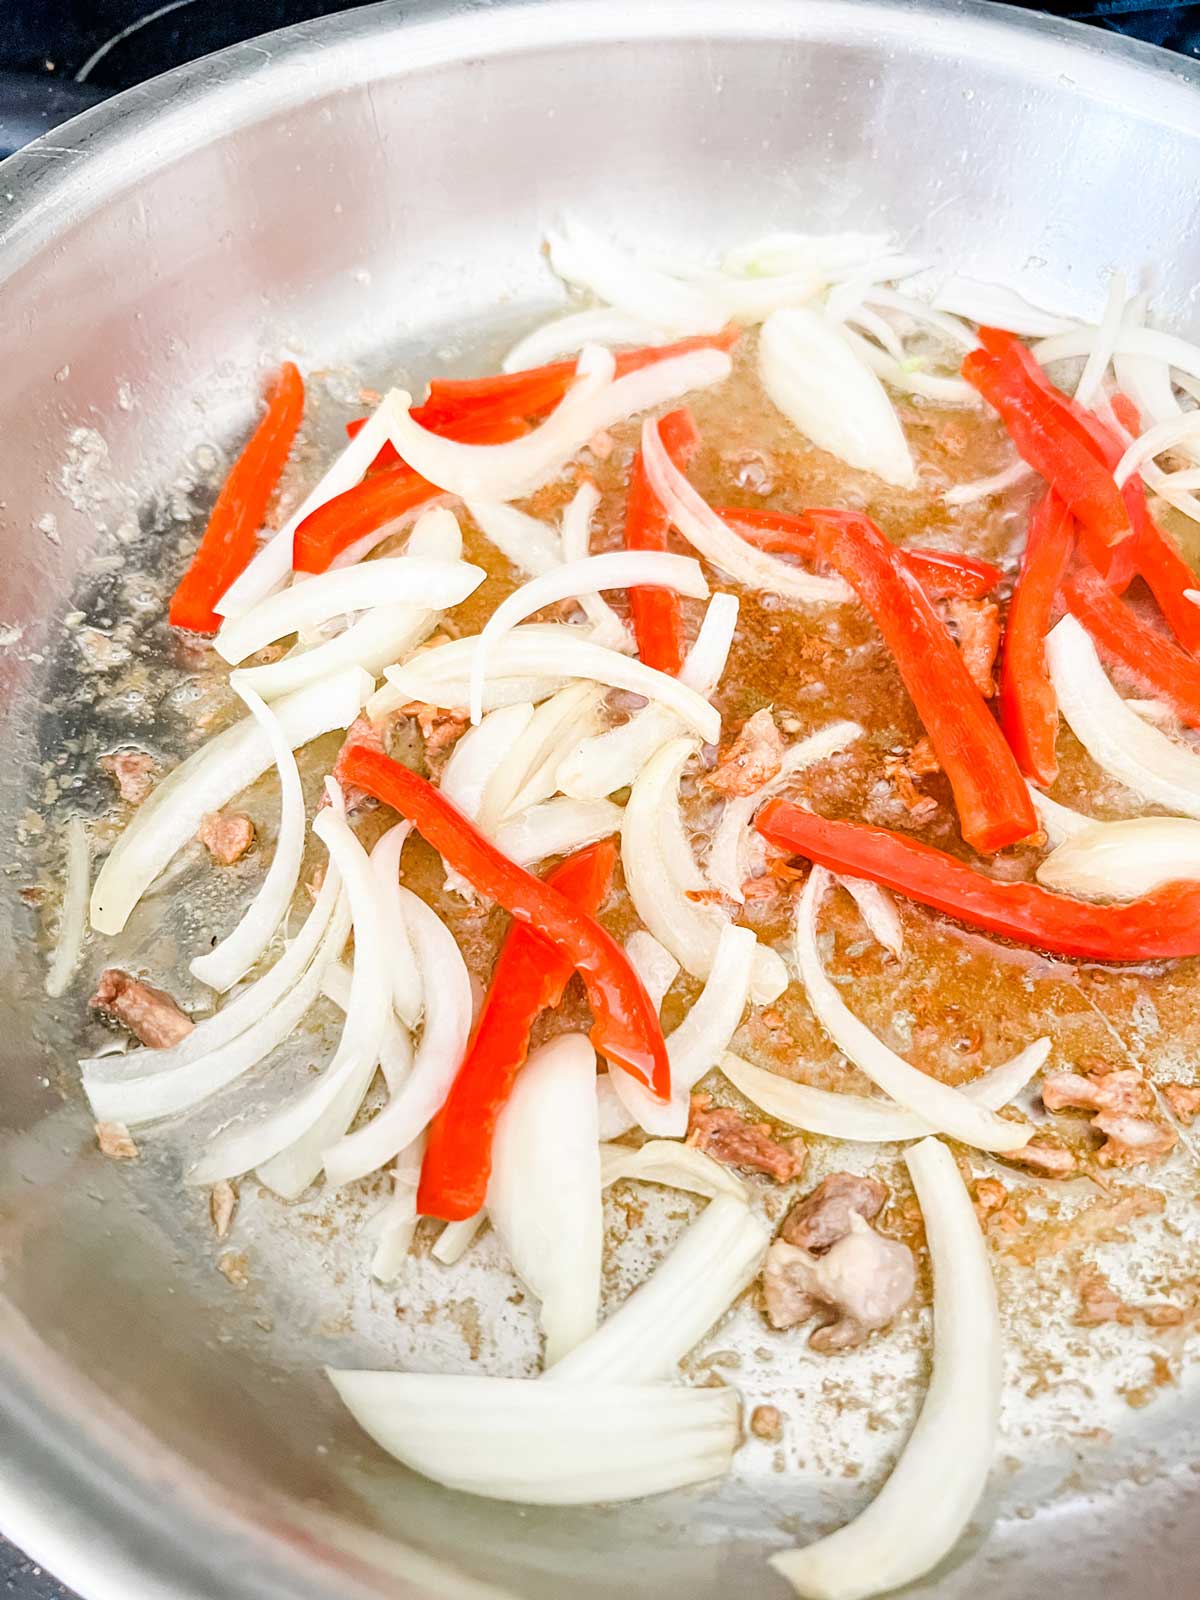 Onion and red pepper strips cooking in a skillet.